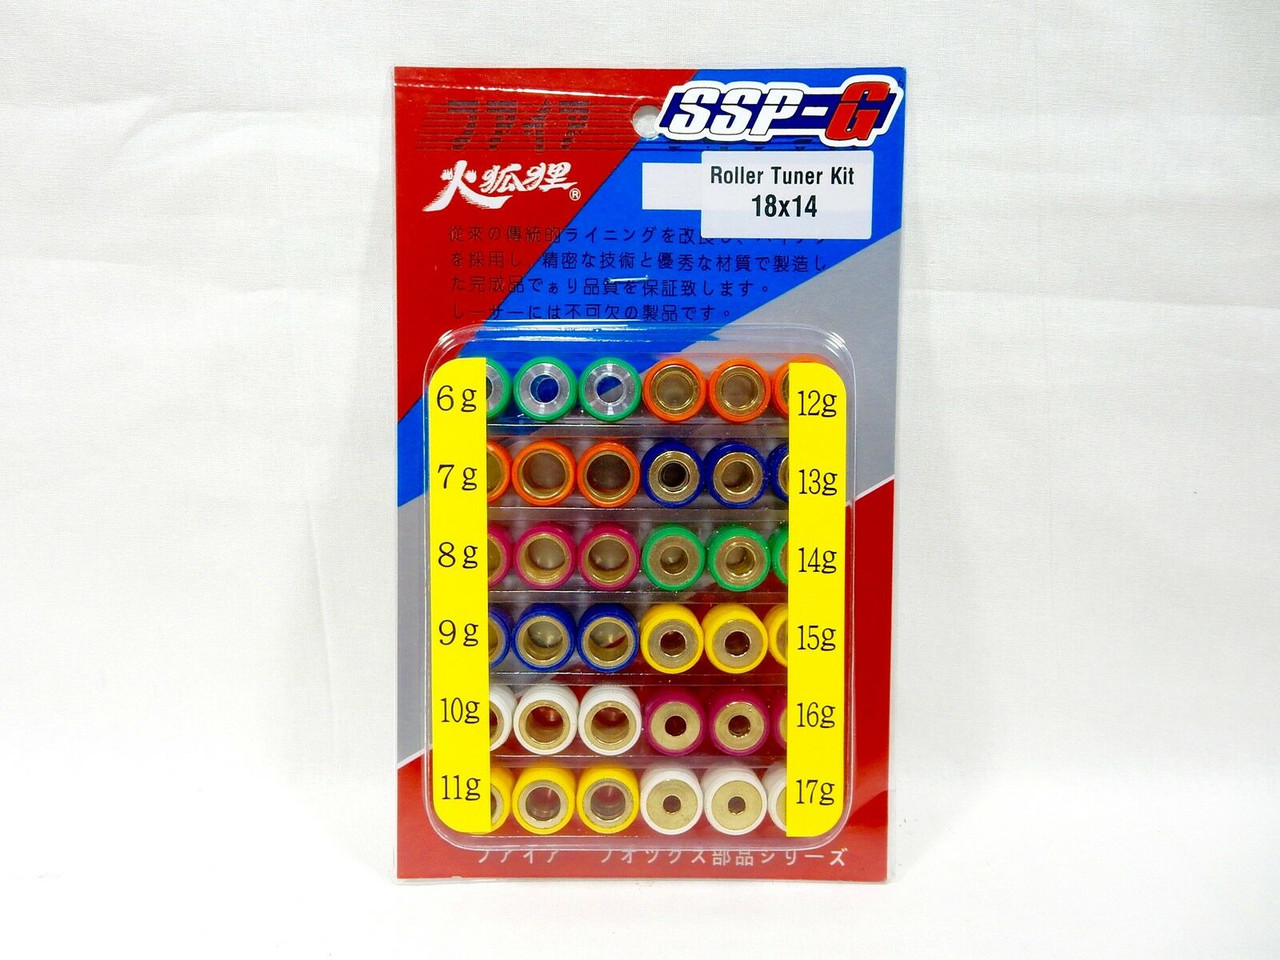 SSP-G ROLLER WEIGHT TUNING KIT (18x14) *6gm - 17gm* FOR 150cc - 232cc GY6 -  gy6racing